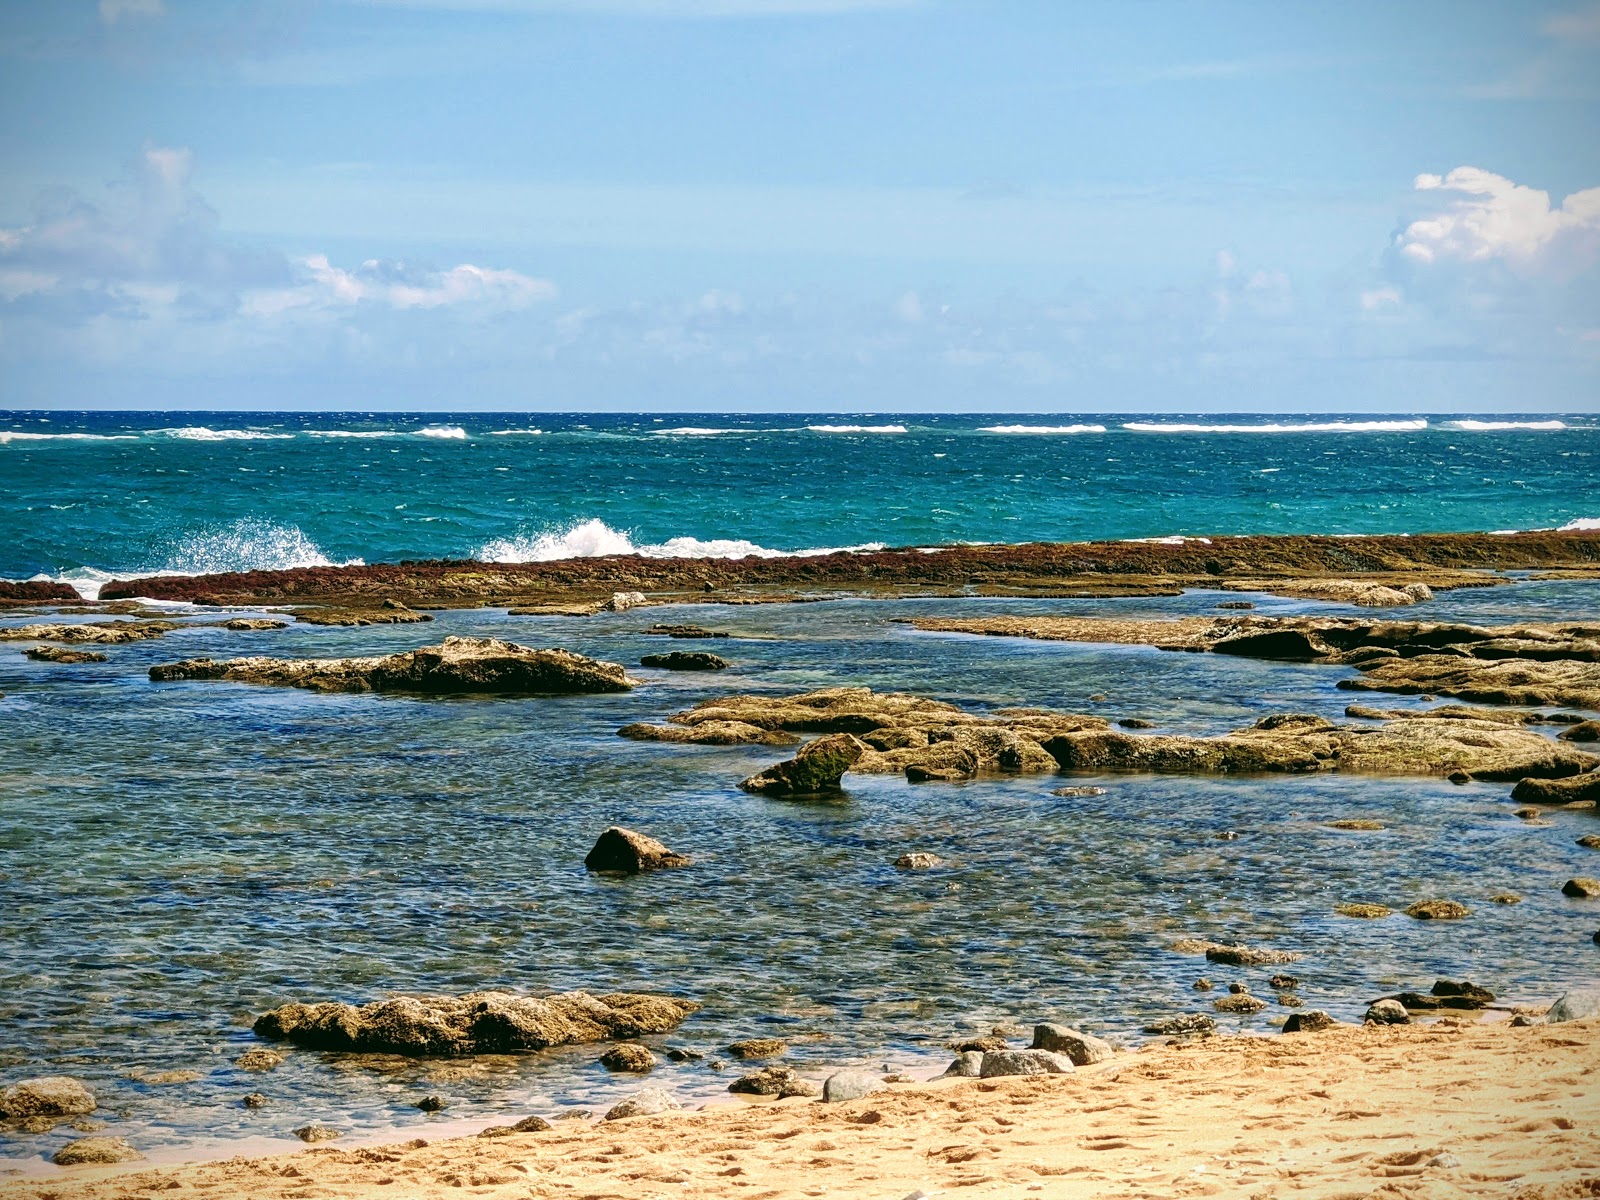 Photo of Kuau Cove Beach and the settlement